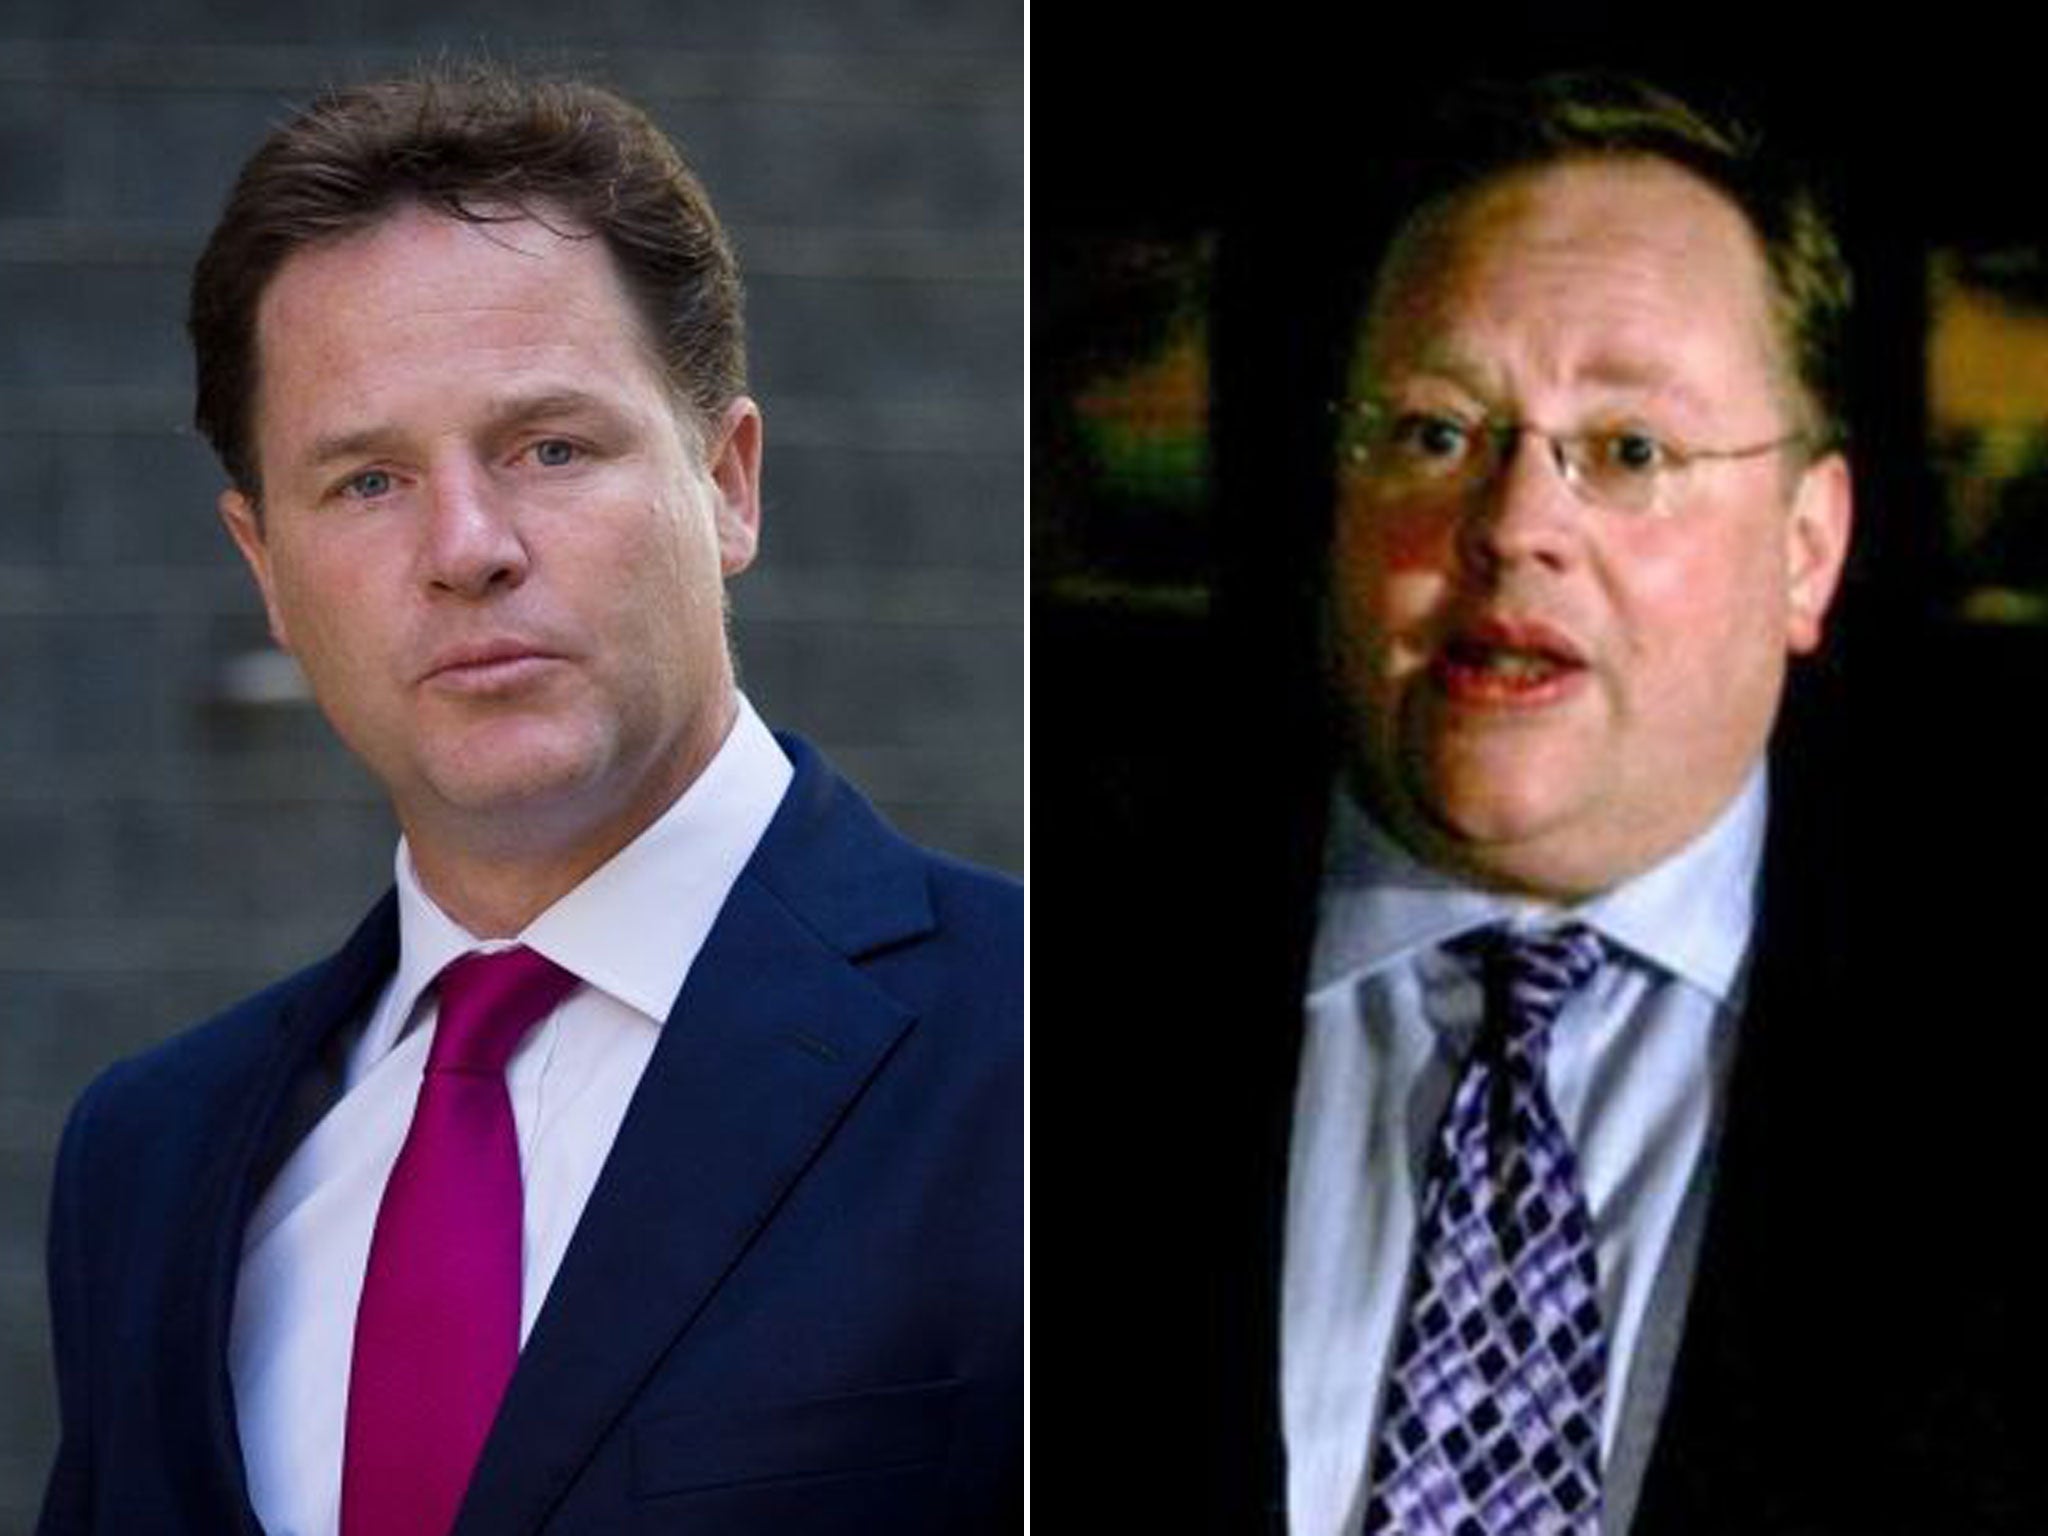 Lord Rennard's comments have caused many problems for Nick Clegg